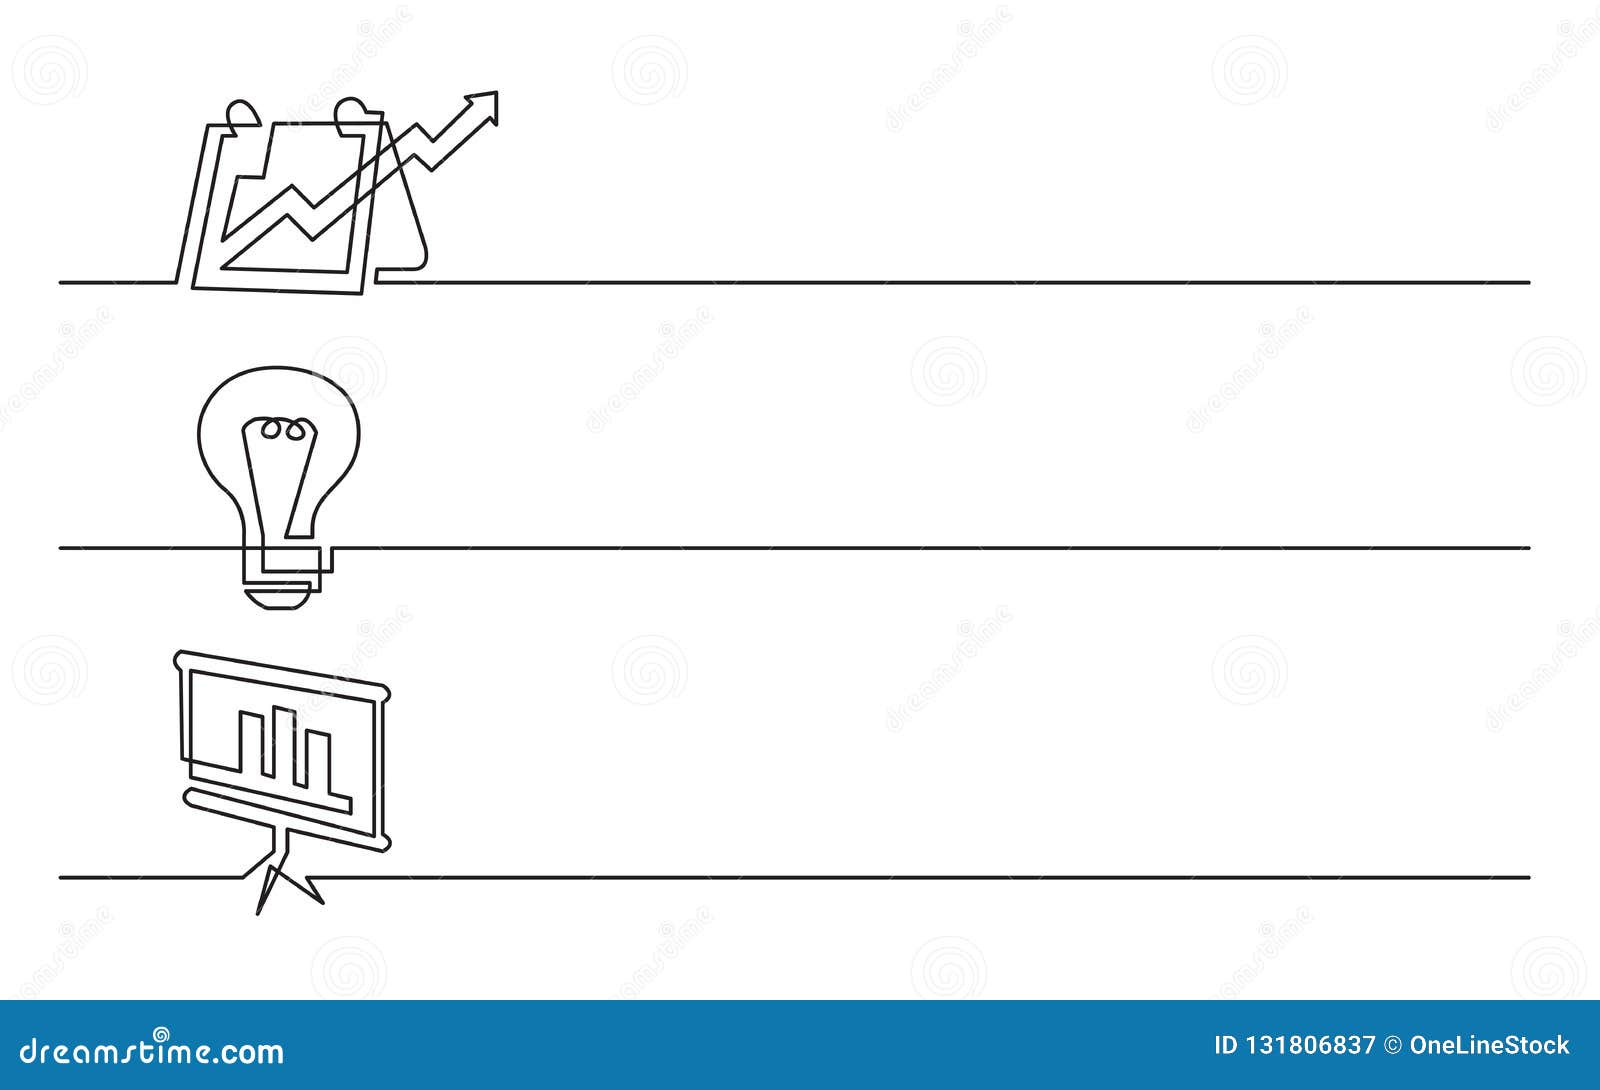 Lamp line drawing style design Royalty Free Vector Image